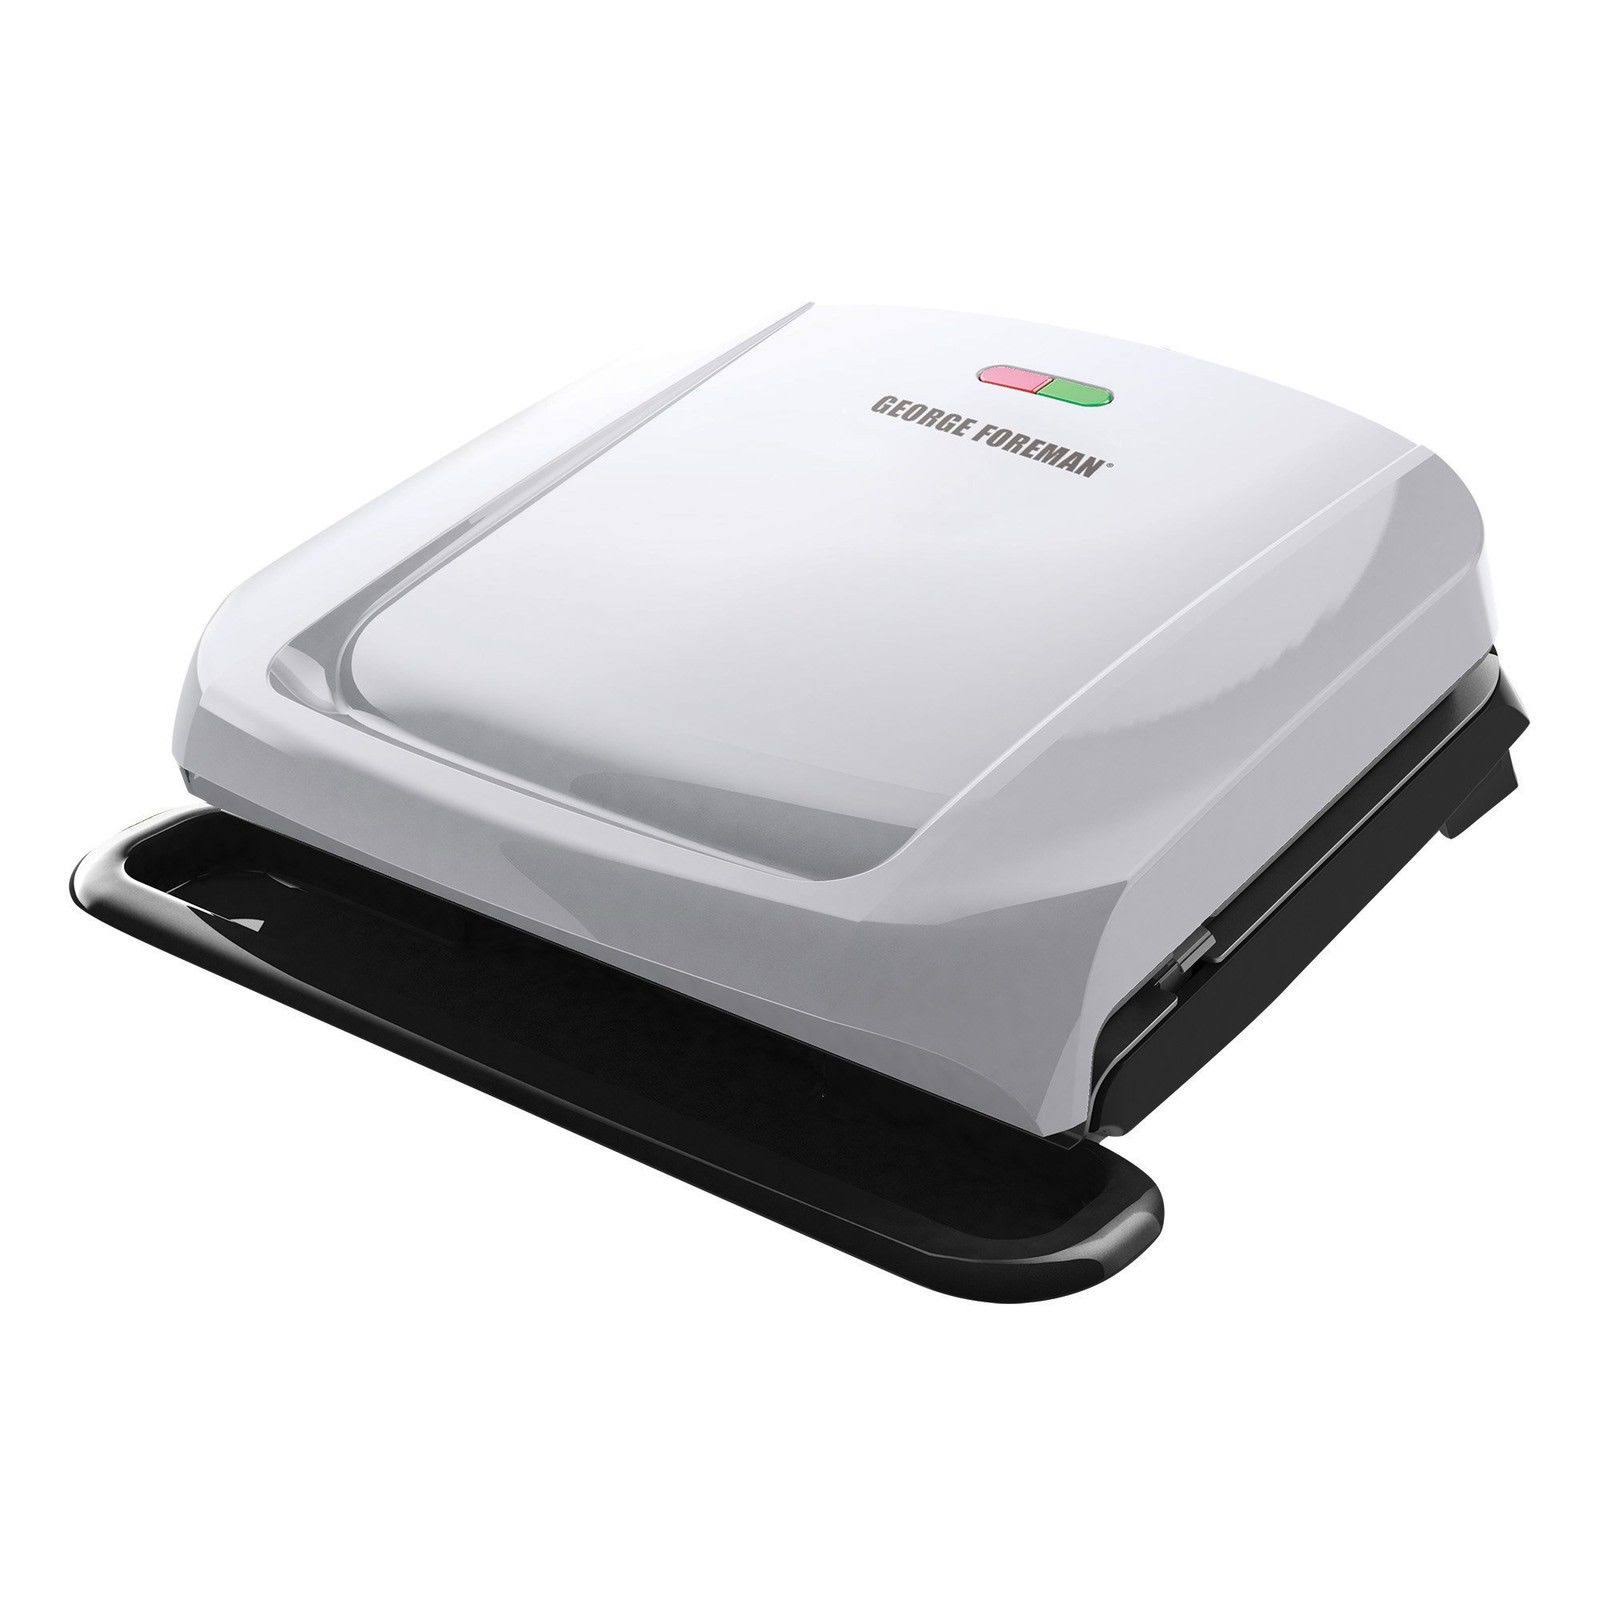 George Foreman 4-Serving Removable Plate Grill and Panini Press, Platinum, GRP1060P